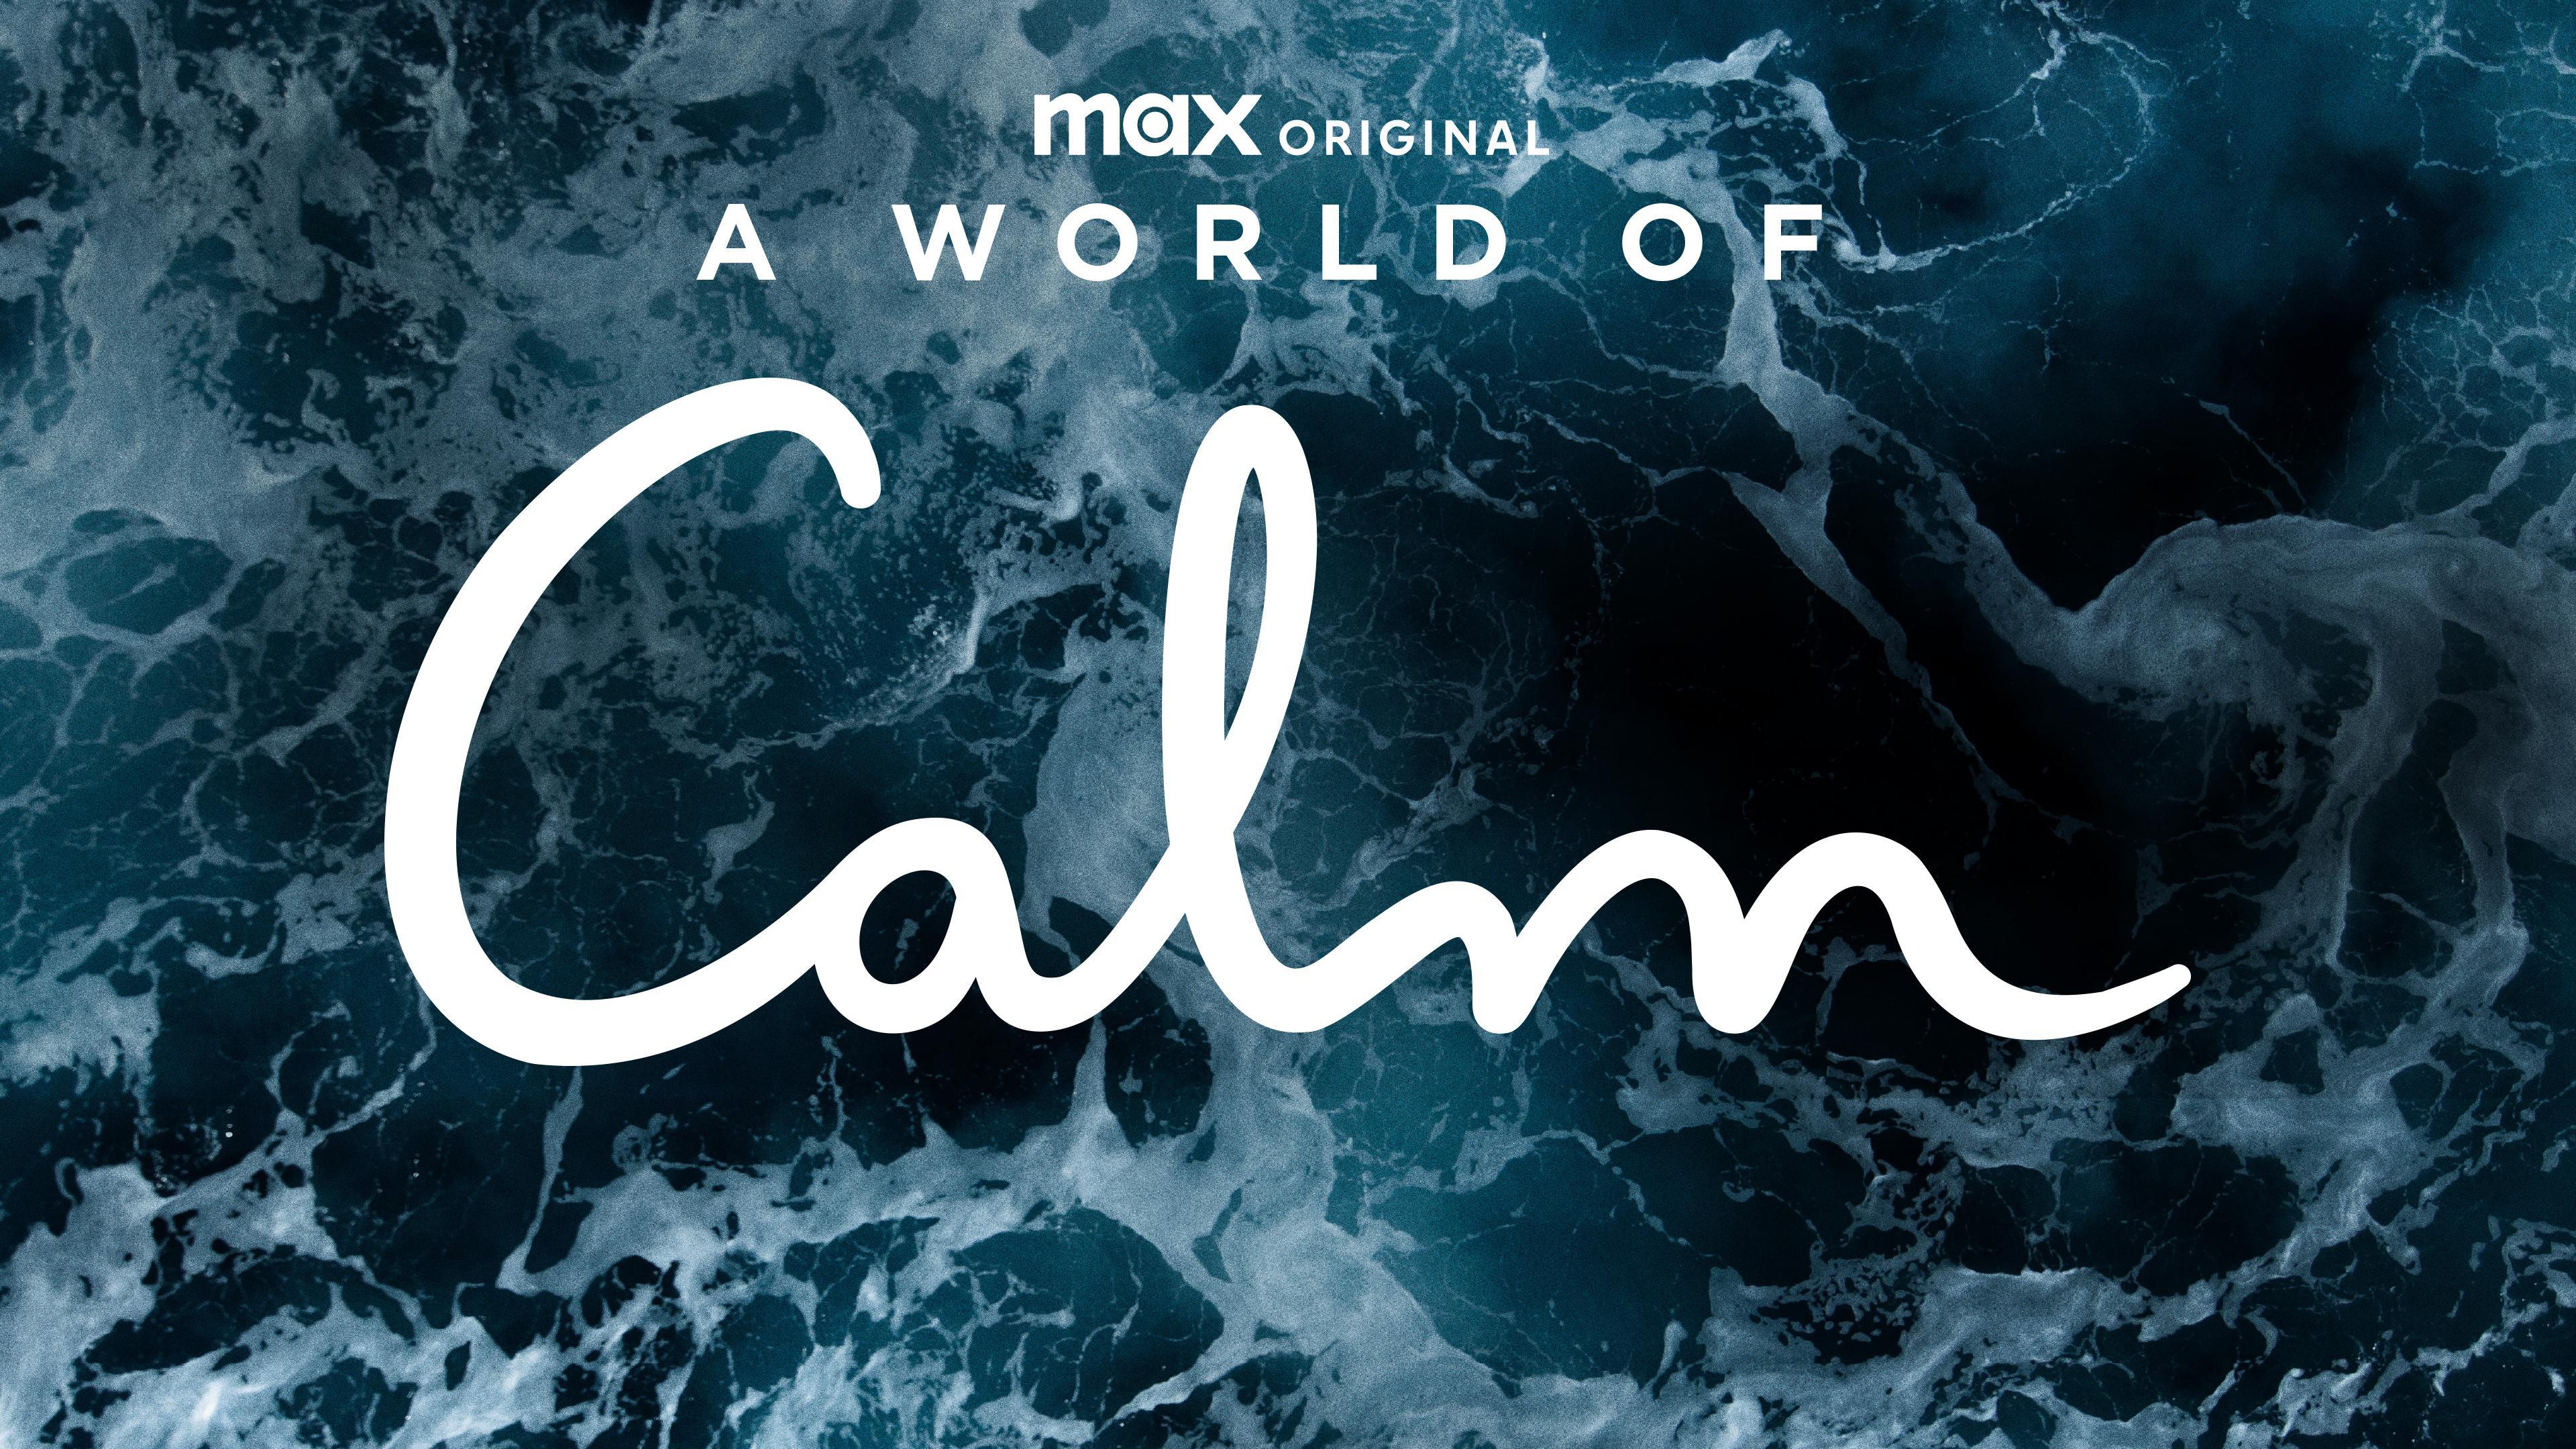 A world of something. A World of Calm.